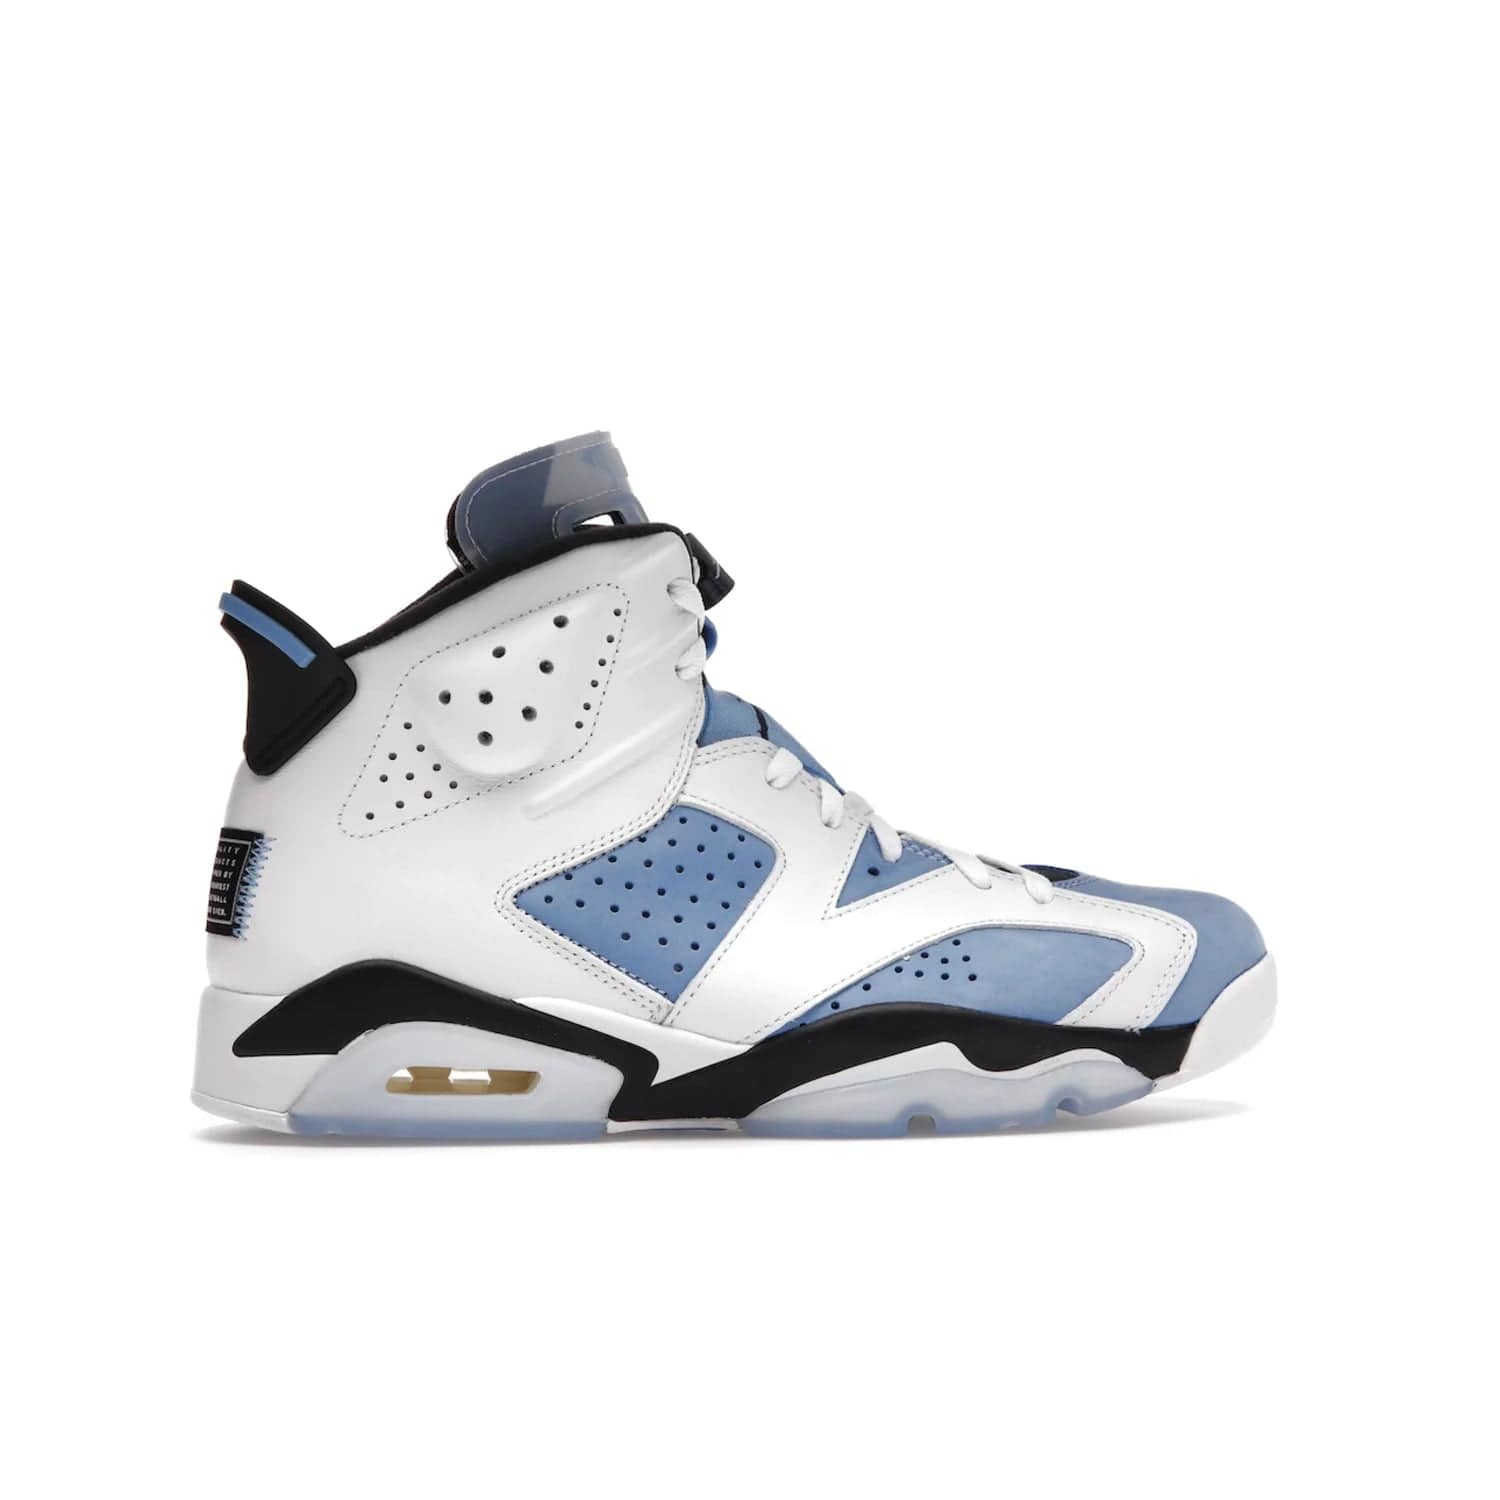 Jordan 6 Retro UNC White - Image 36 - Only at www.BallersClubKickz.com - Air Jordan 6 Retro UNC White with classic UNC colors brings nostalgia and style to a legendary silhouette. Celebrate MJ's alma mater with navy blue accents, icy semi-translucent sole and Jordan Team patch. Out March 2022 for the Sneaker Enthusiast.